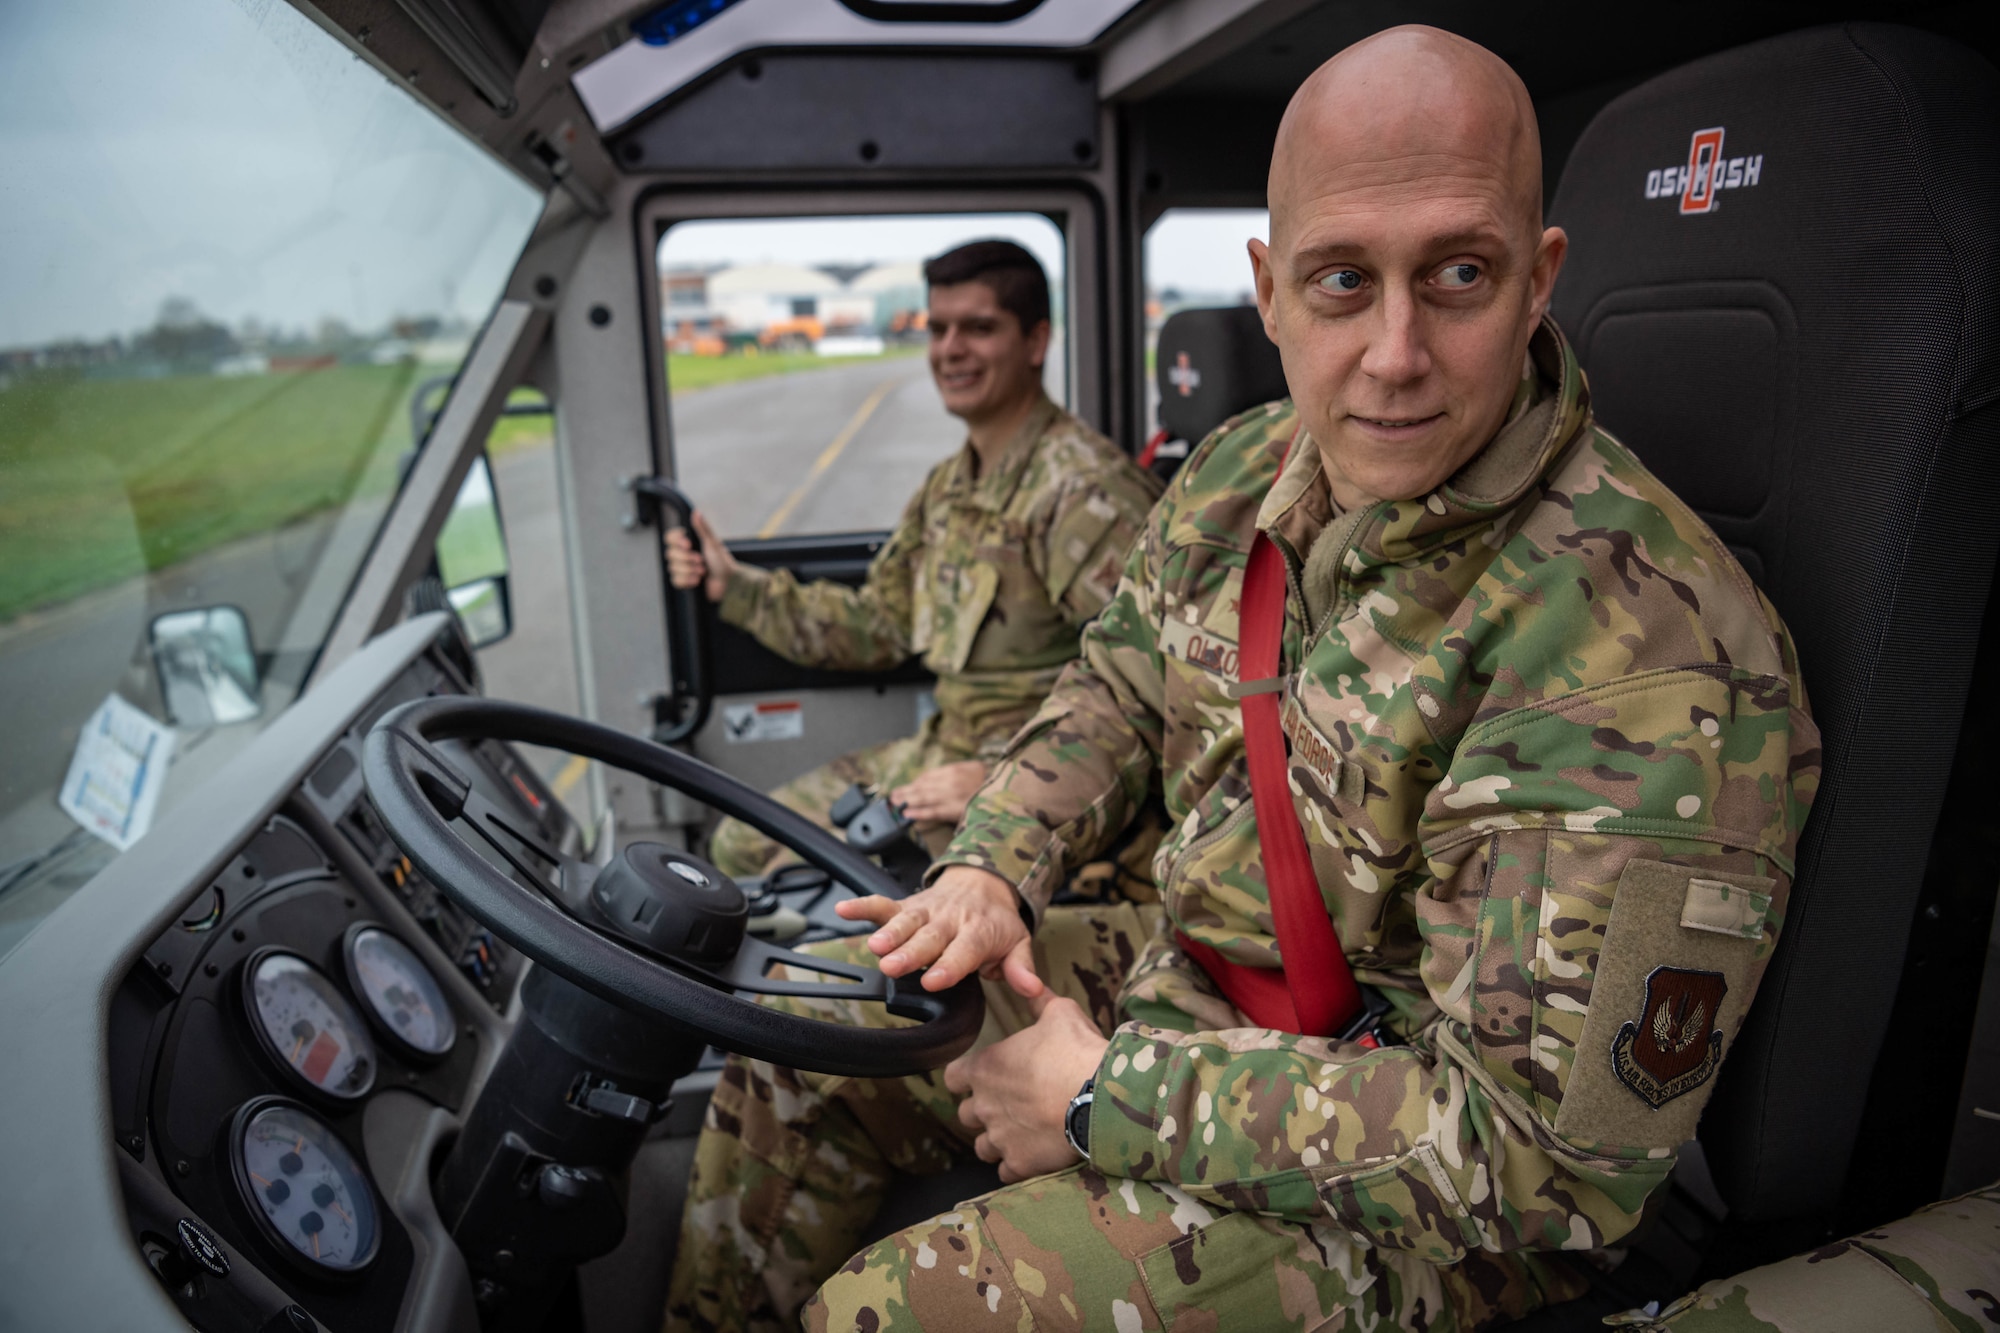 U.S. Air Force Brig. Gen. Josh Olson, right, 86th Airlift Wing commander, drives a firetruck during a 424th Air Base Squadron immersion tour at Chievres Air Base, Belgium, Nov. 16, 2021. Senior Airman Trenton Meuller, left, 424 ABS driver operator, explained to Olson how to operate the vehicle. During the 424 ABS immersion tour, Chievres provided the 86 AW commander with an up-close look at the day to day operations there. It is the mission of fire protection Airmen to ensure the safety of others and to assist civilian fire departments when needed.   (U.S. Air Force photo by Airman Jared Lovett)